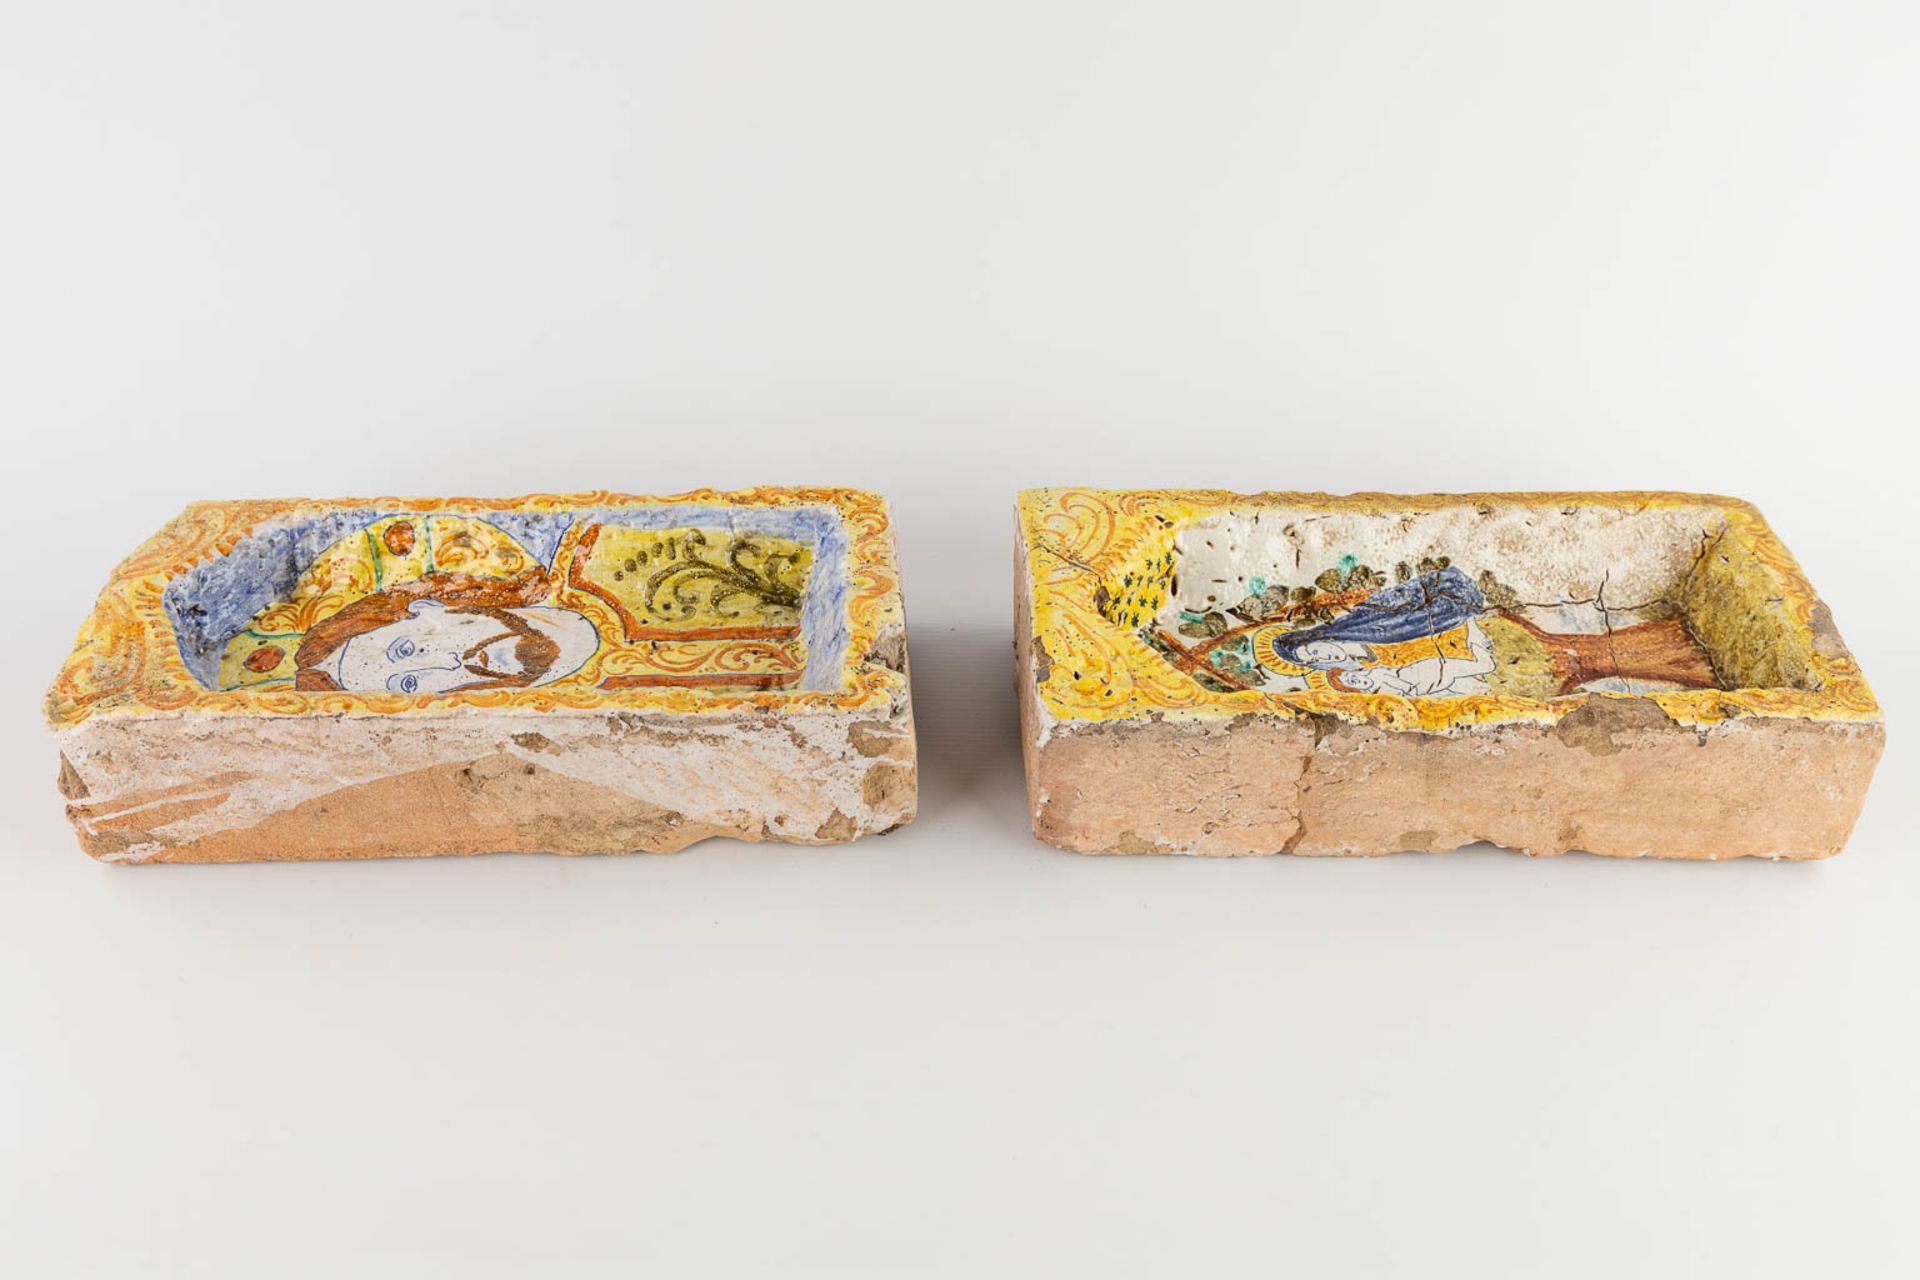 Two terracotta nices/recesses, terracotta with a polychrome image of Jesus and Madonna with a Child. - Image 5 of 17